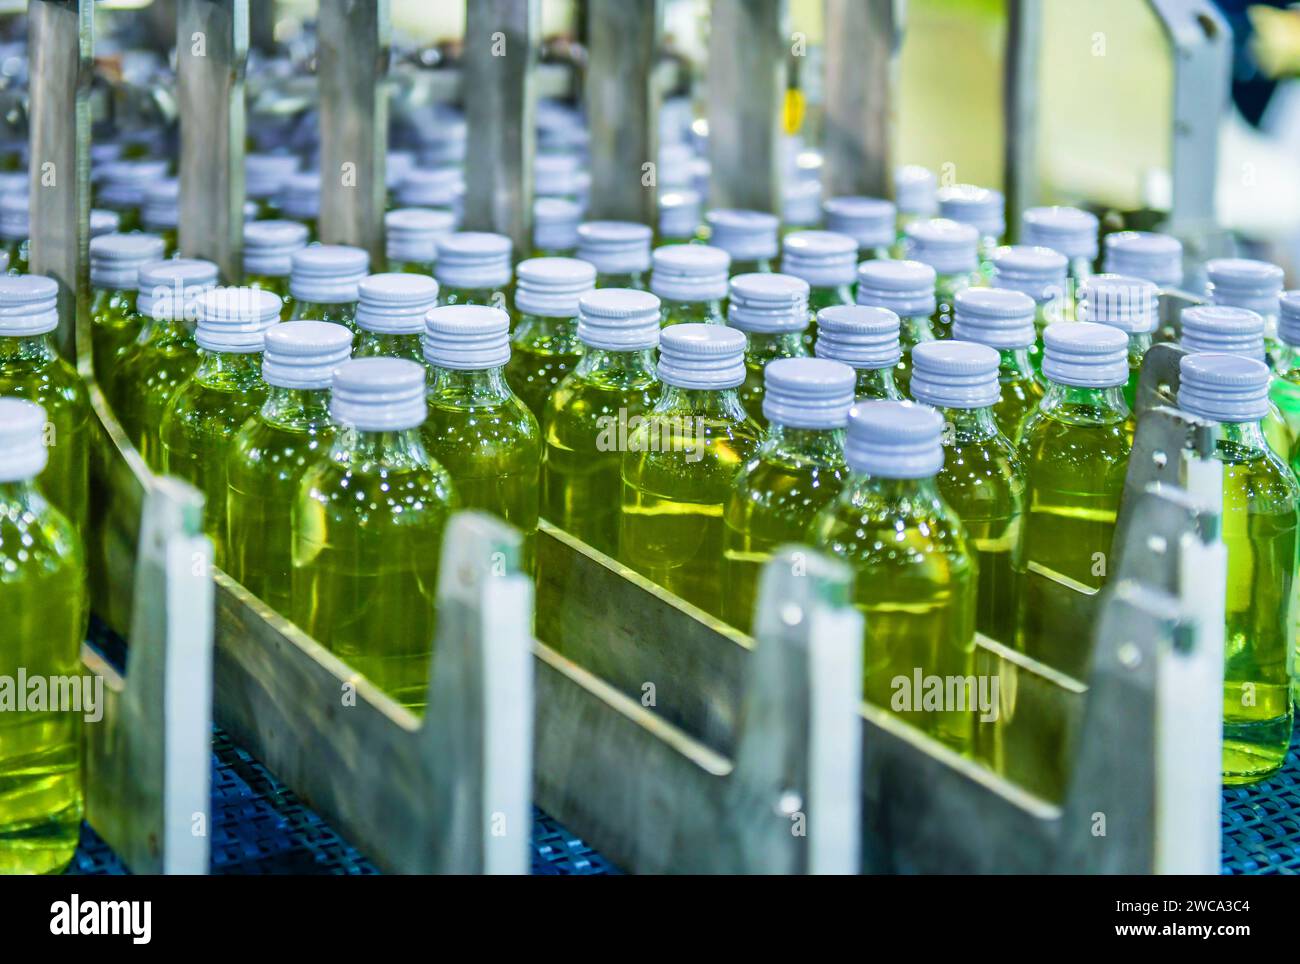 Transfer of glass bottles on automatic conveyor systems Industrial automation for packaging Stock Photo